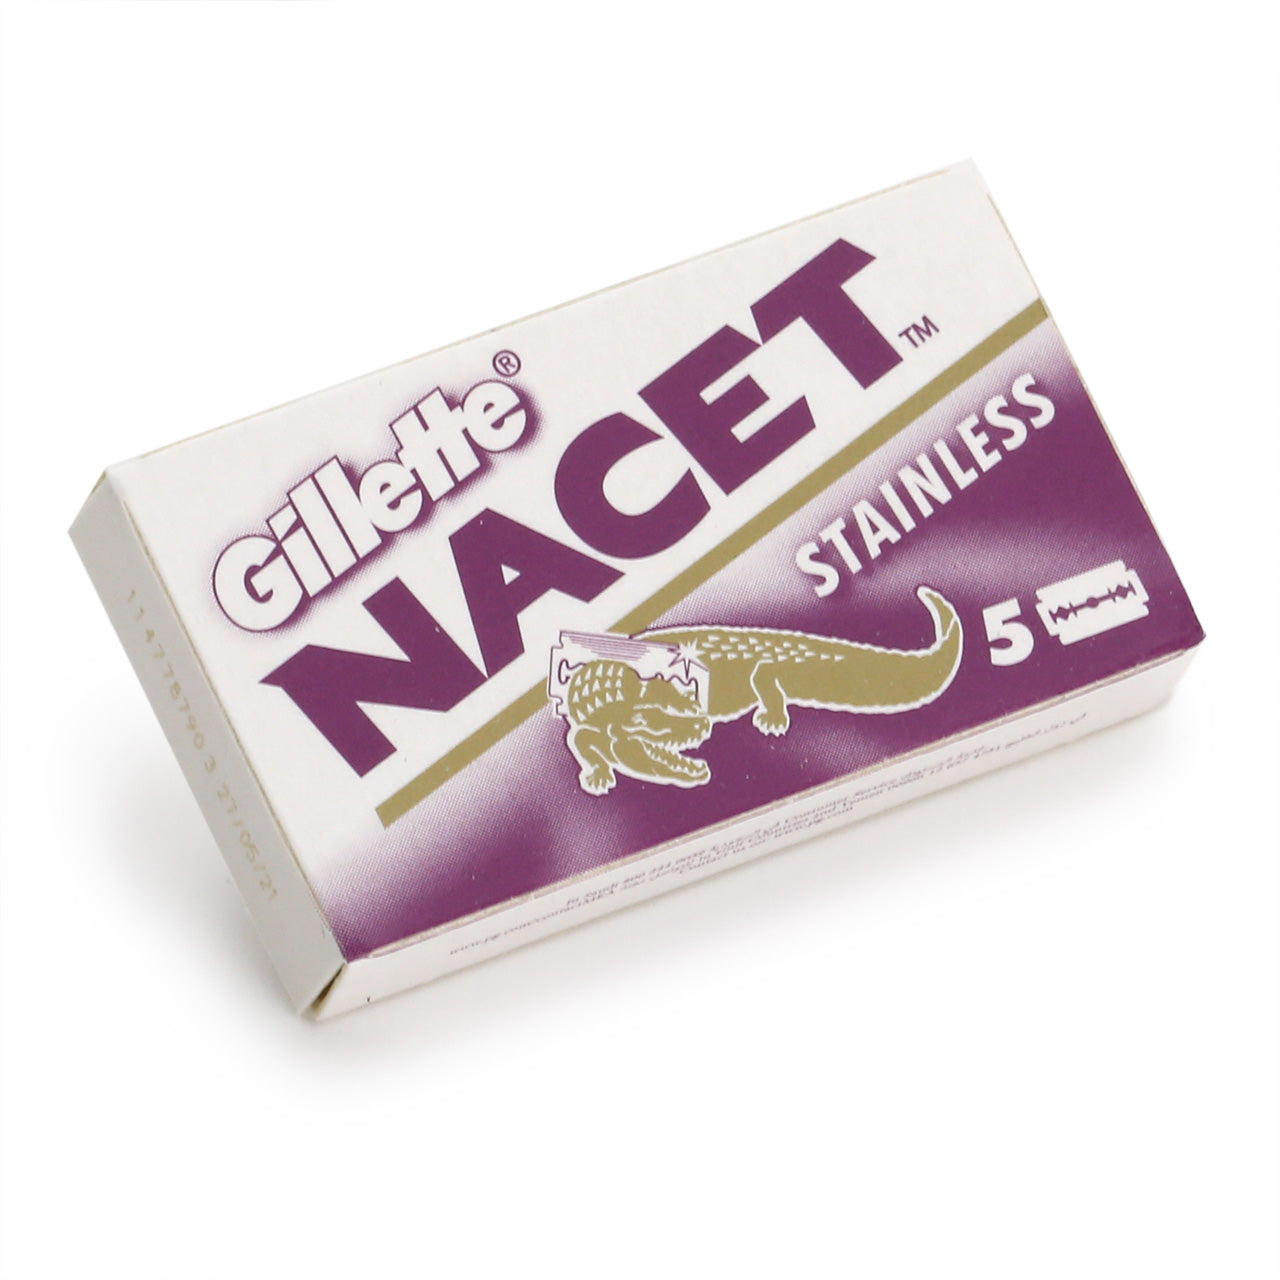 DE blades from Gillet Nacet - Stainless. Fold-out pack of 20 tucks totalling 100 blades